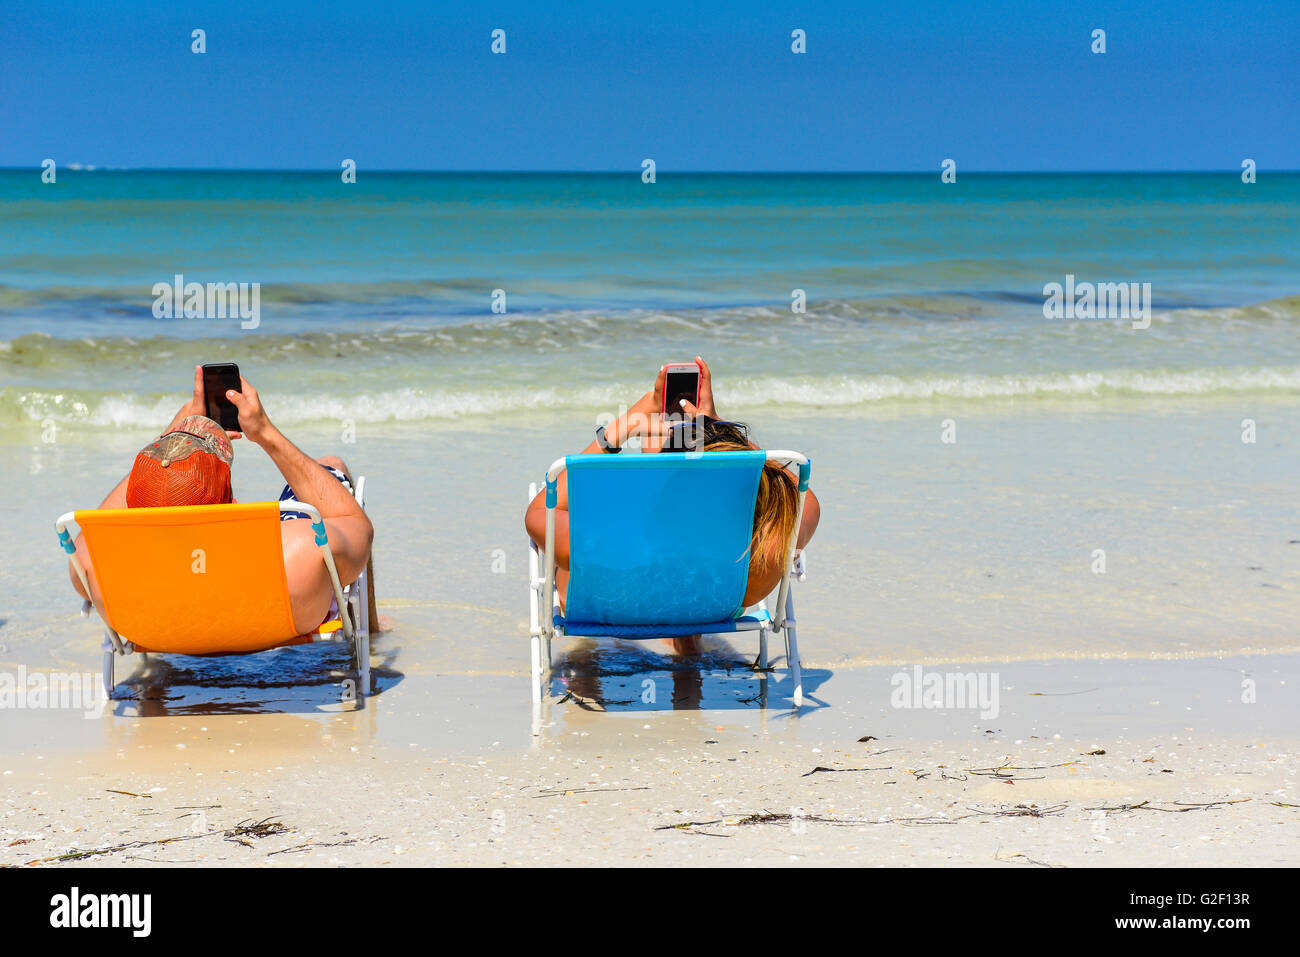 Preoccupied couple can't stop looking at their cell phones to enjoy each other or the beach shoreline while reclining in chairs Stock Photo